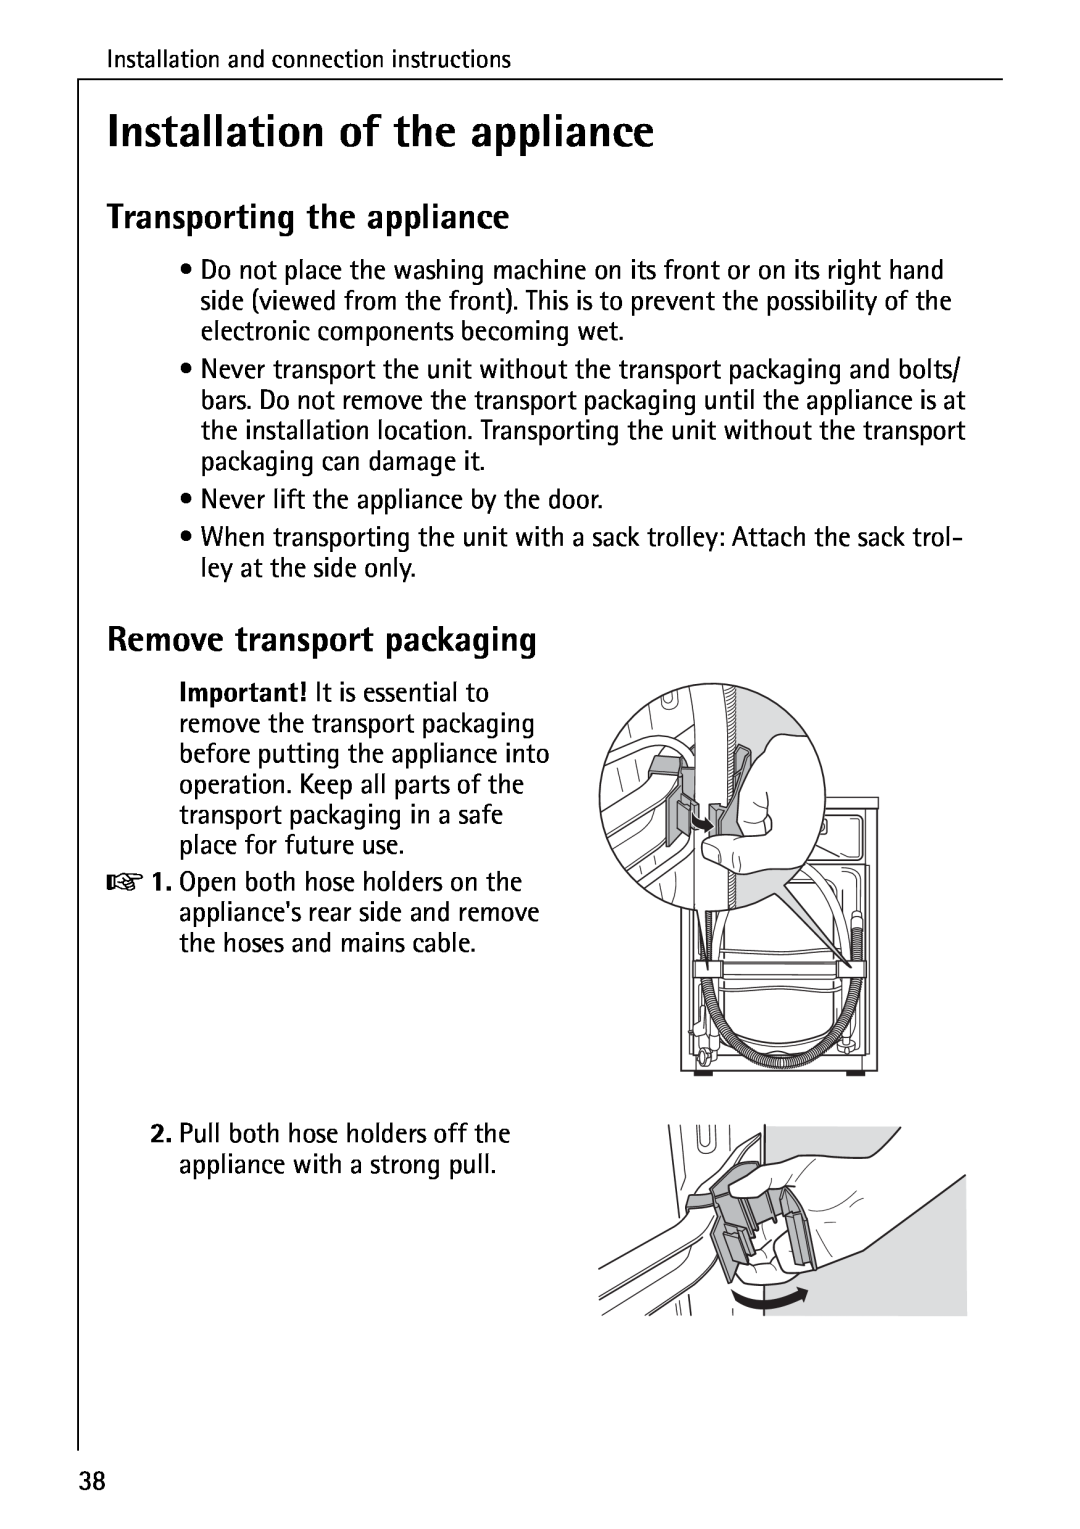 Electrolux 76639 manual Installation of the appliance, Transporting the appliance, Remove transport packaging 